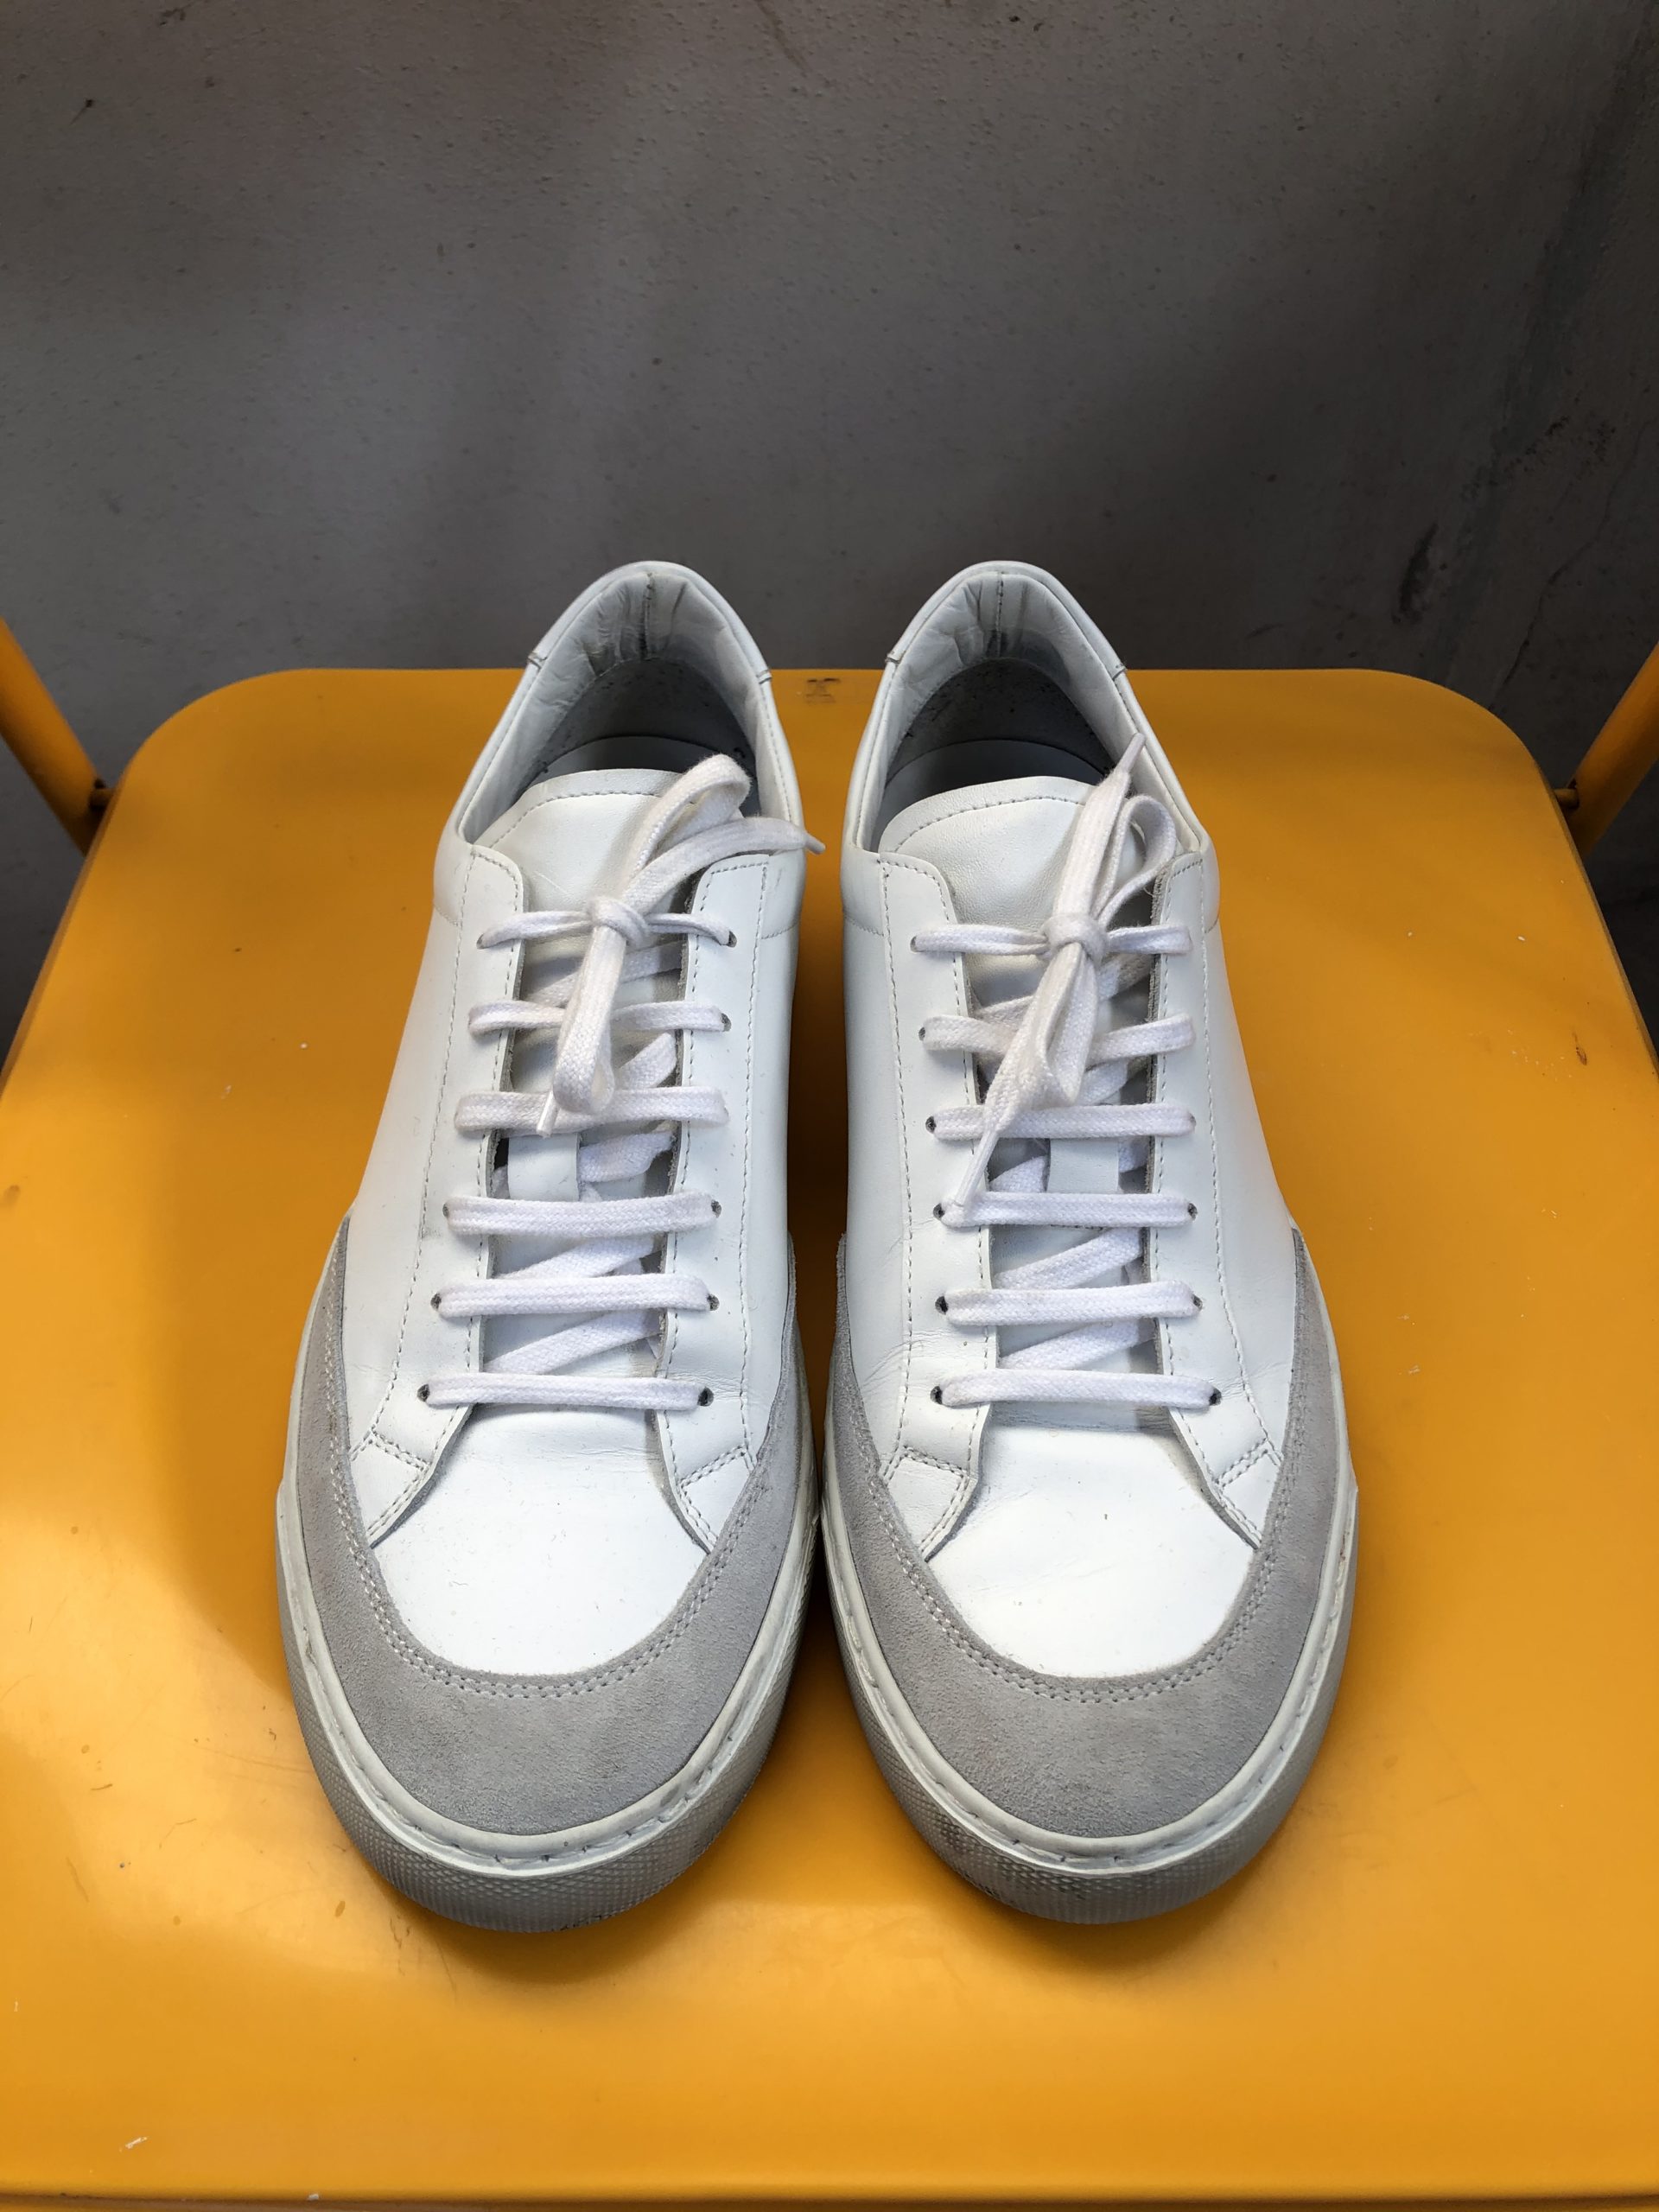 Common Project 'Tennis Pro' sneakers - Size 39 - Be like Lola